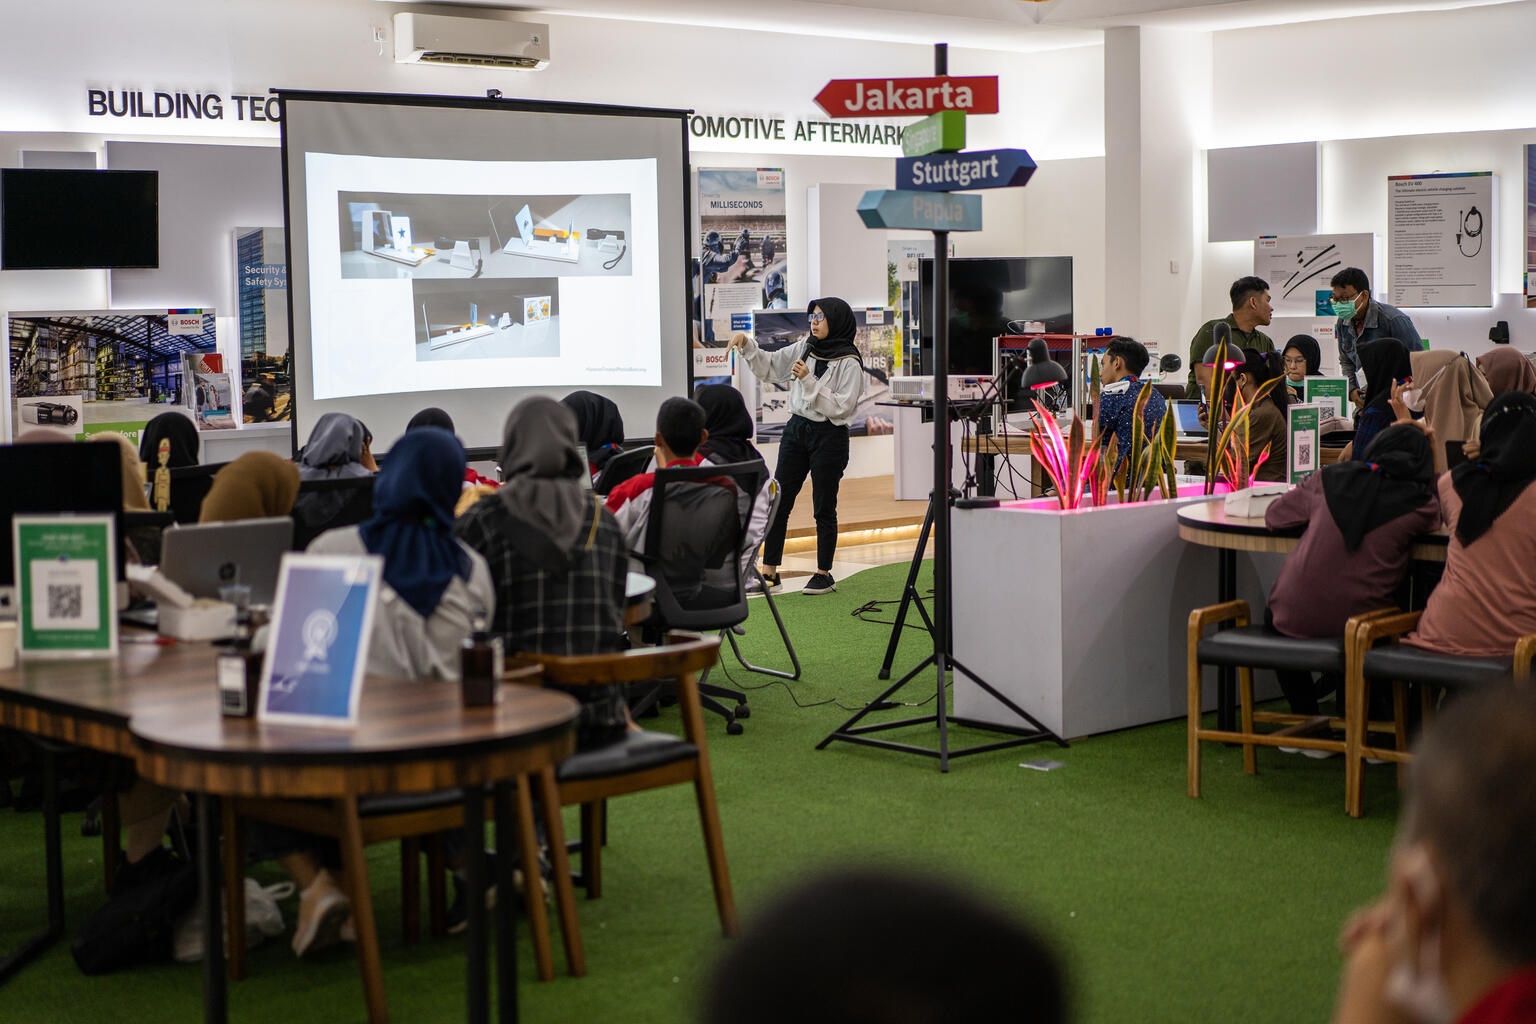 Students participate in an intensive bootcamp as part of the Digital Innovation Challenge 2022: Generasi Terampil programme held in Surabaya, East Java, Indonesia, on 24 September 2022. @UNICEF?UN0716533/Fauzan Ijazah